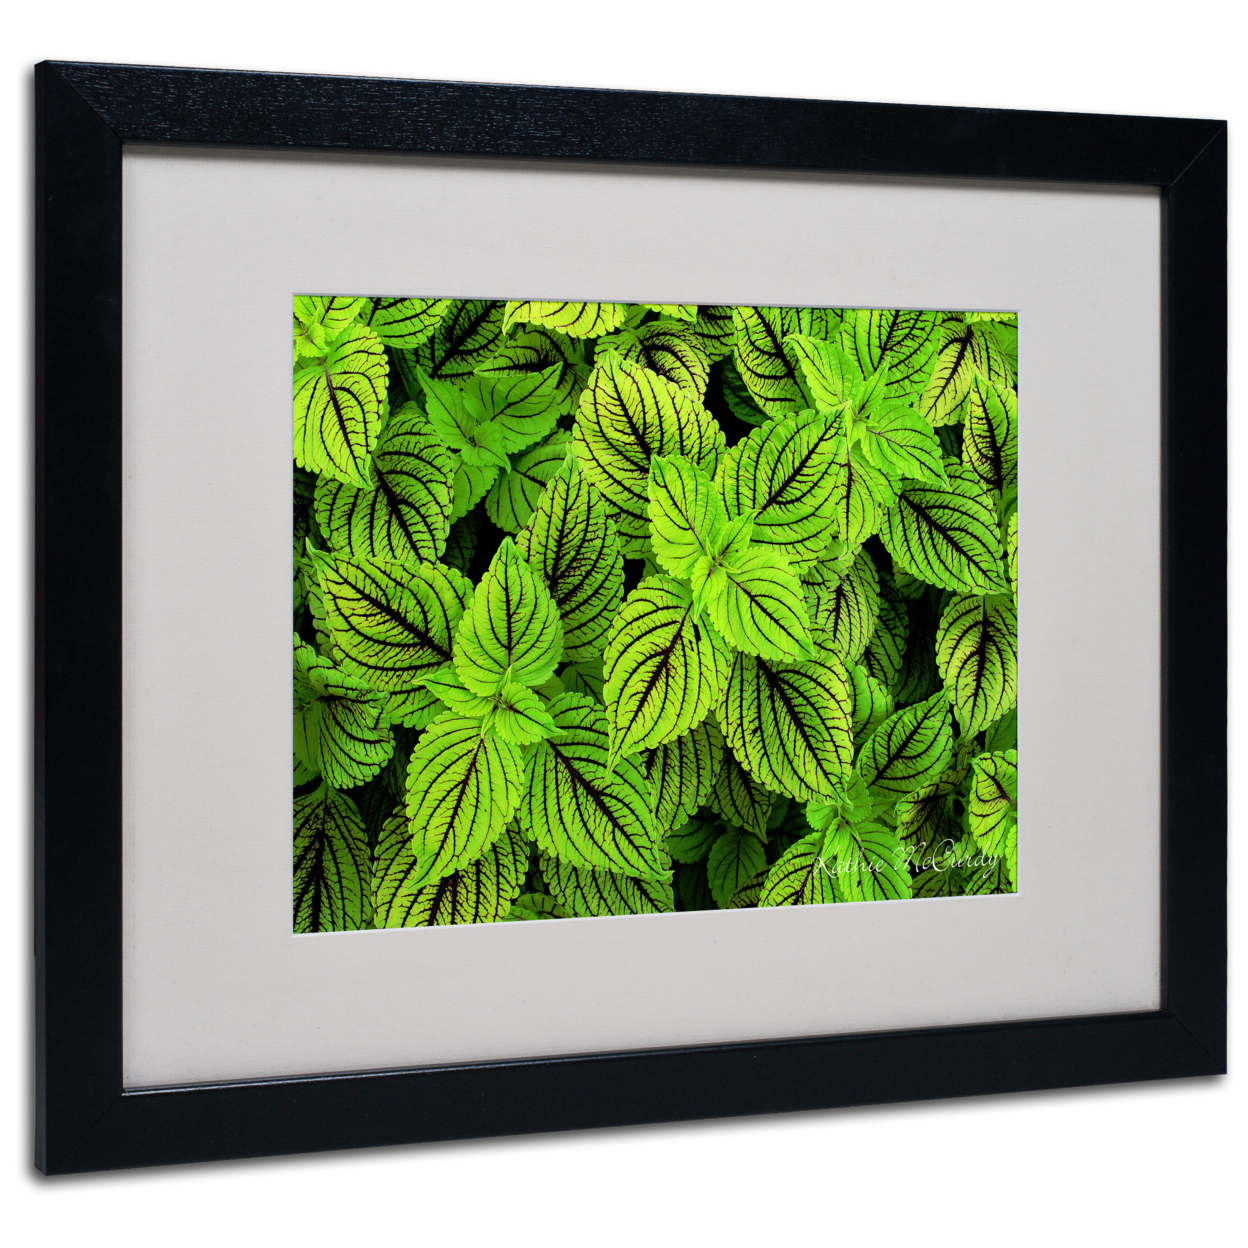 Kathie McCurdy 'Coleus' Black Wooden Framed Art 18 X 22 Inches